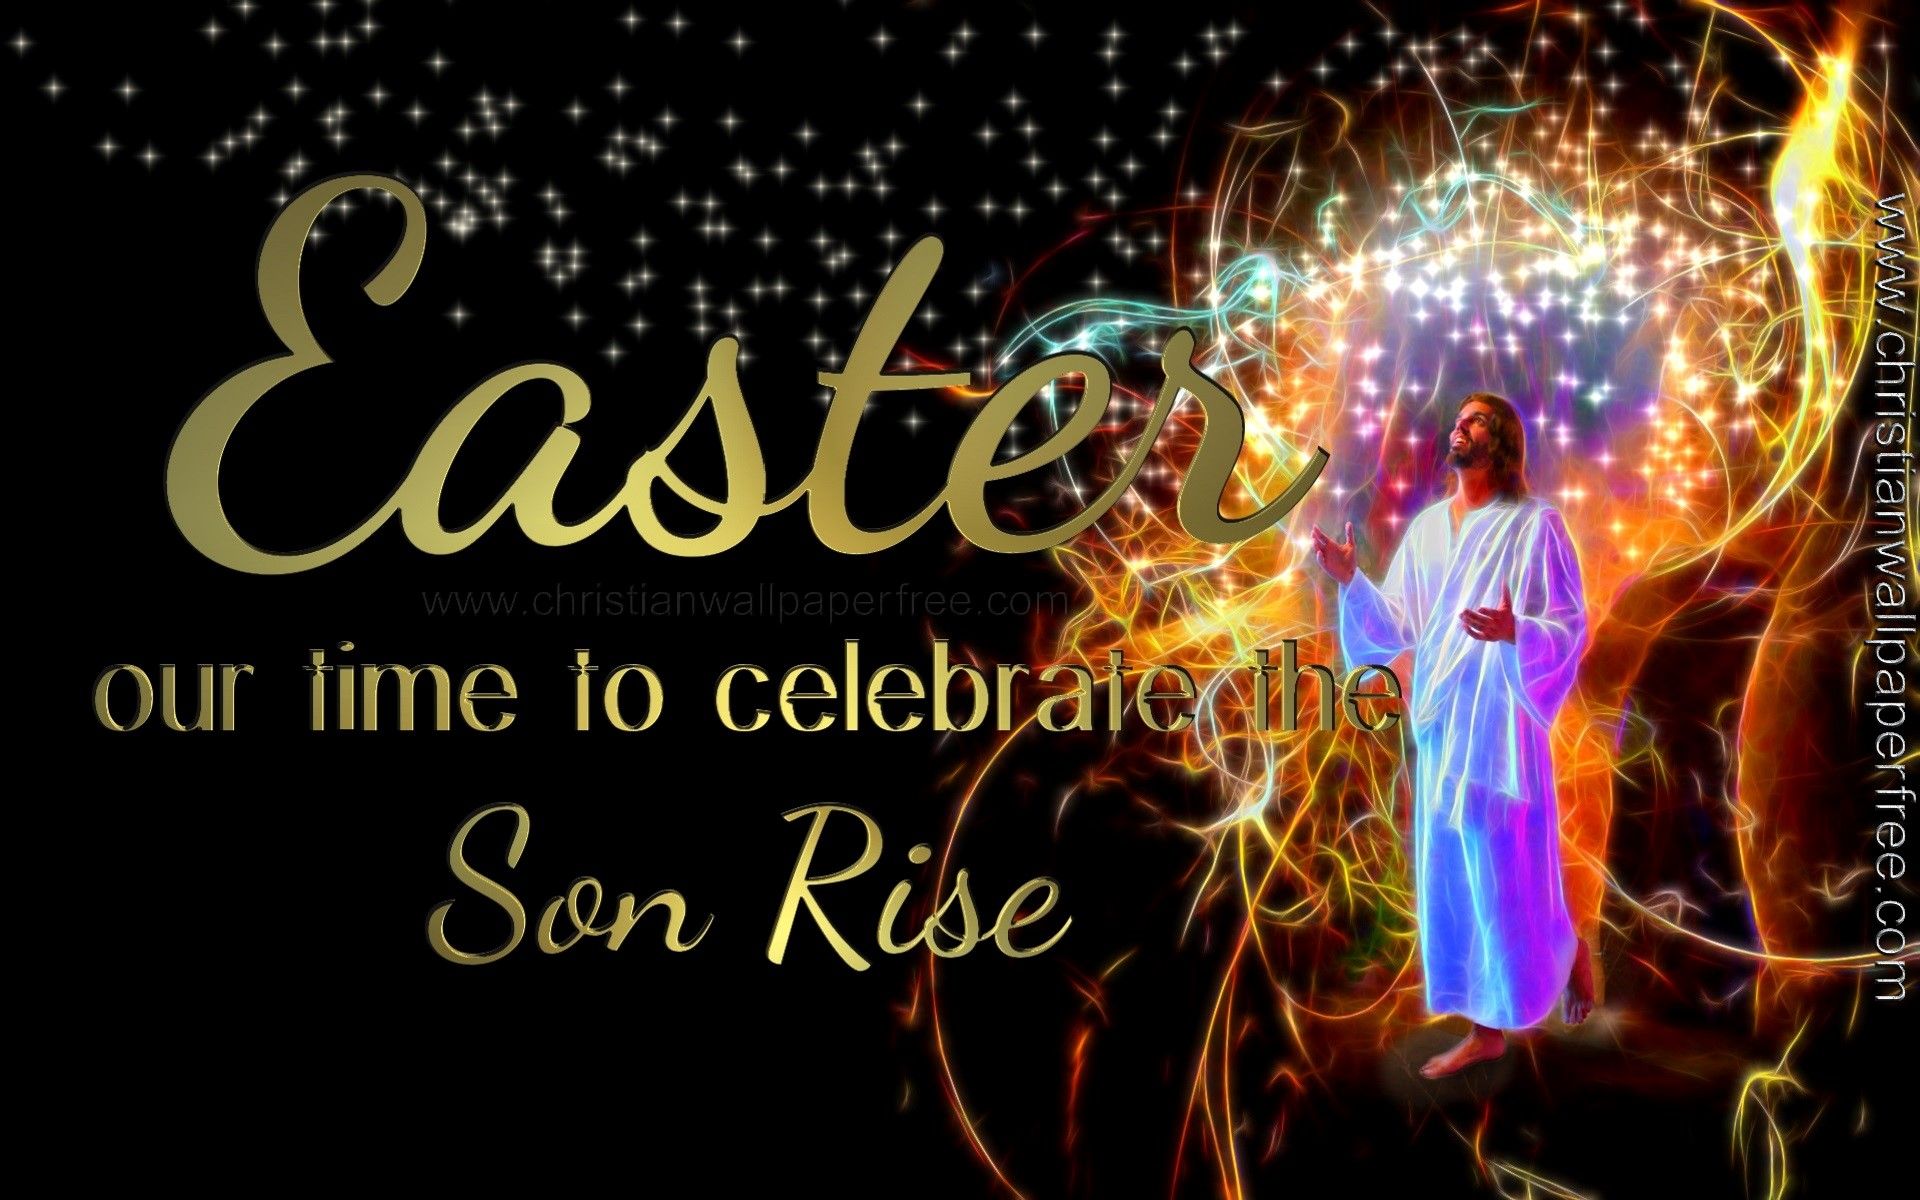 Easter Our Time to Celebrate Wallpaper Free. Christian wallpaper, Christian background, Screen savers wallpaper